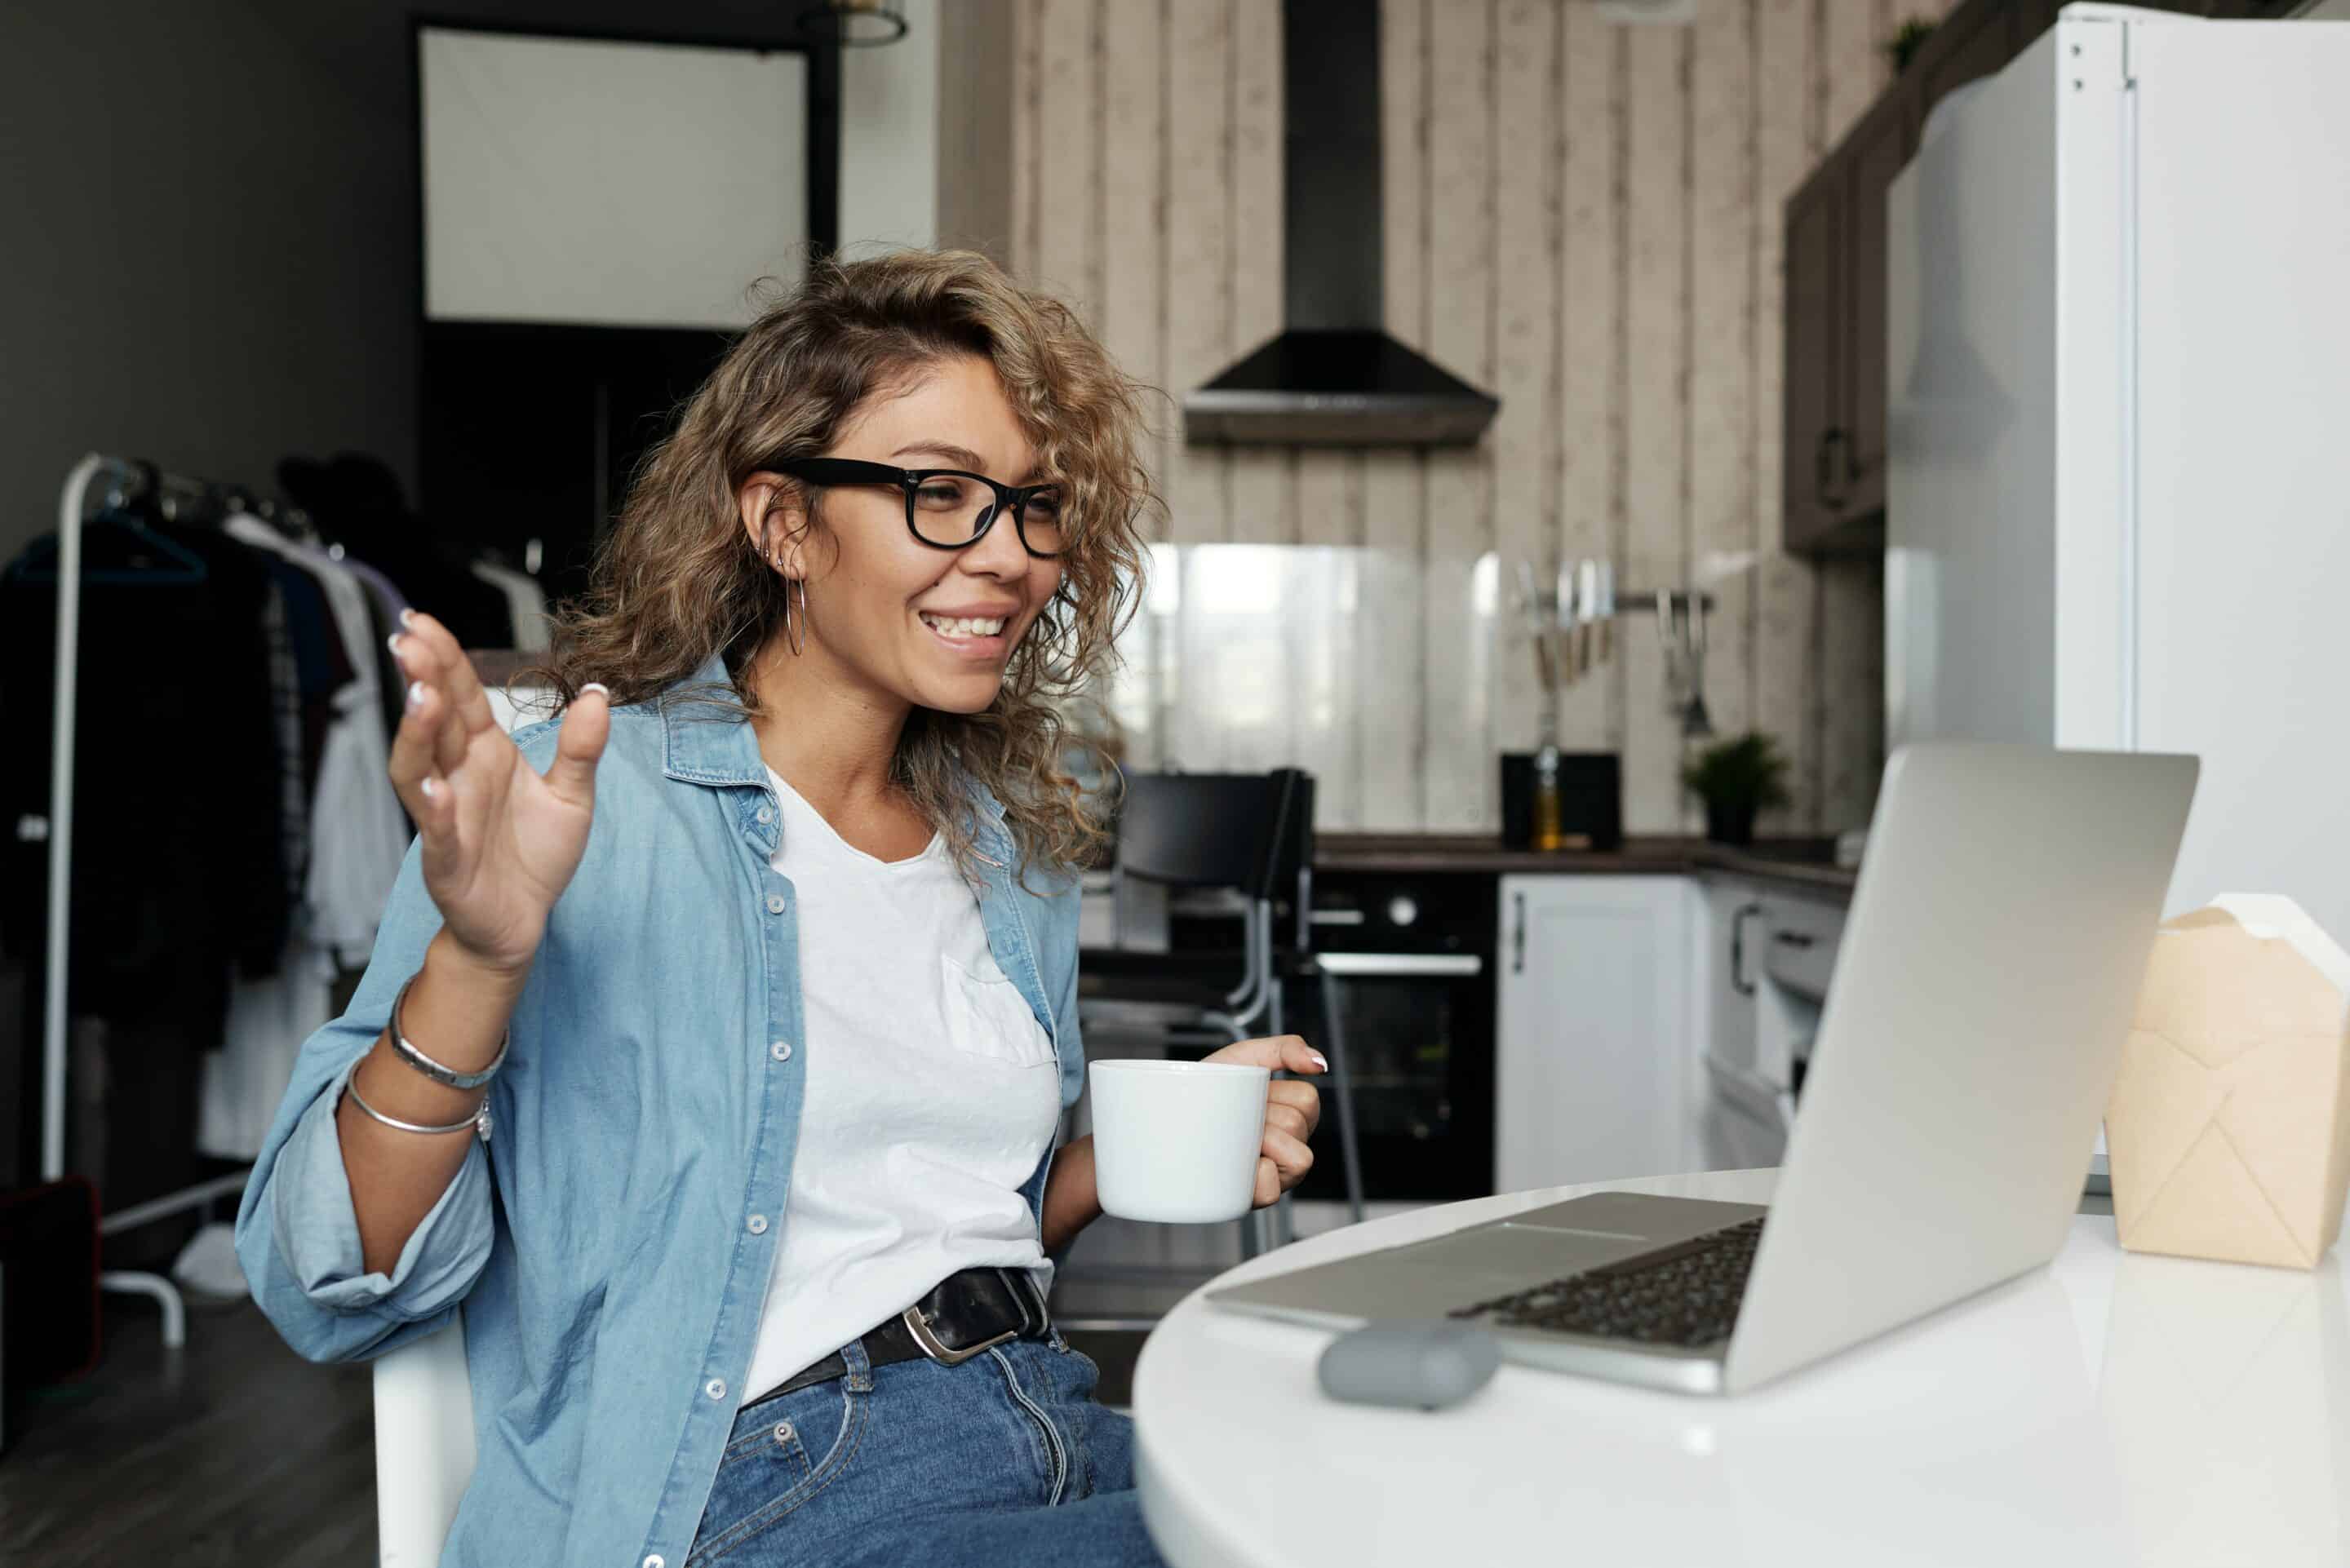 smiling girl with glasses and curly hair holding coffee cup sitting in front of computer, joining a virtual trauma processing group